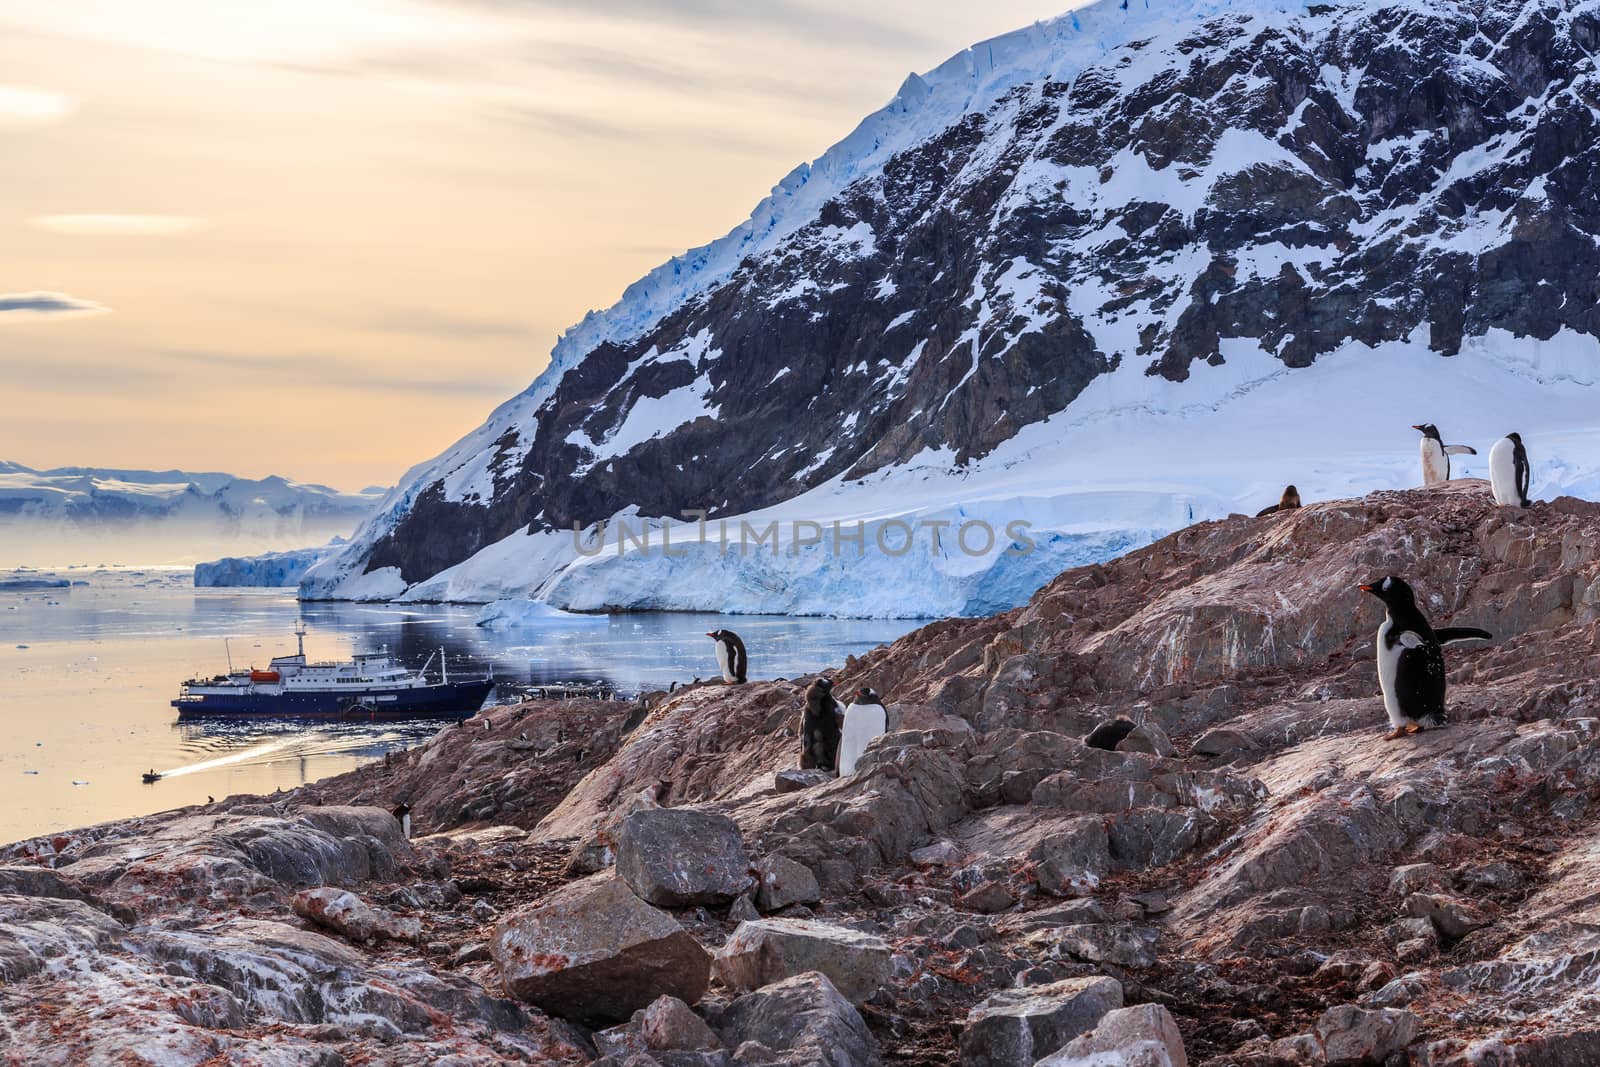 Gentoo penguins gathered on the rocky shore of Neco bay and crui by ambeon